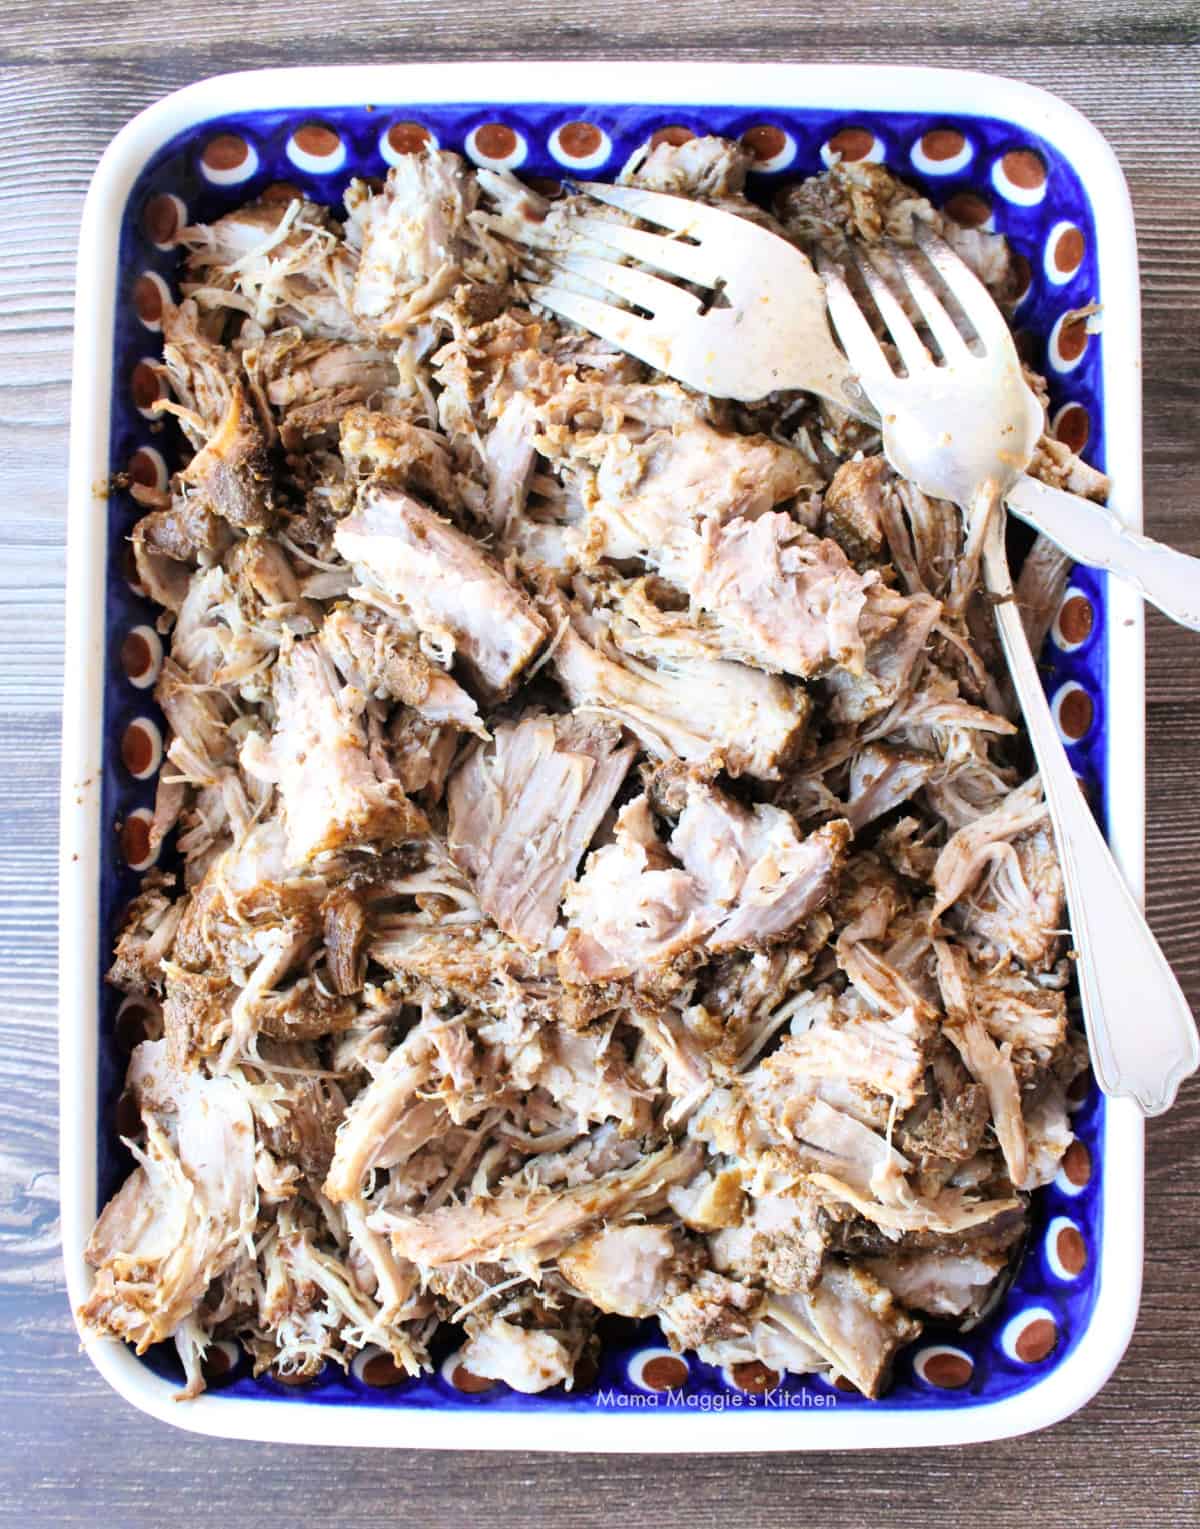 Shredded pork on a plate next to two forks.